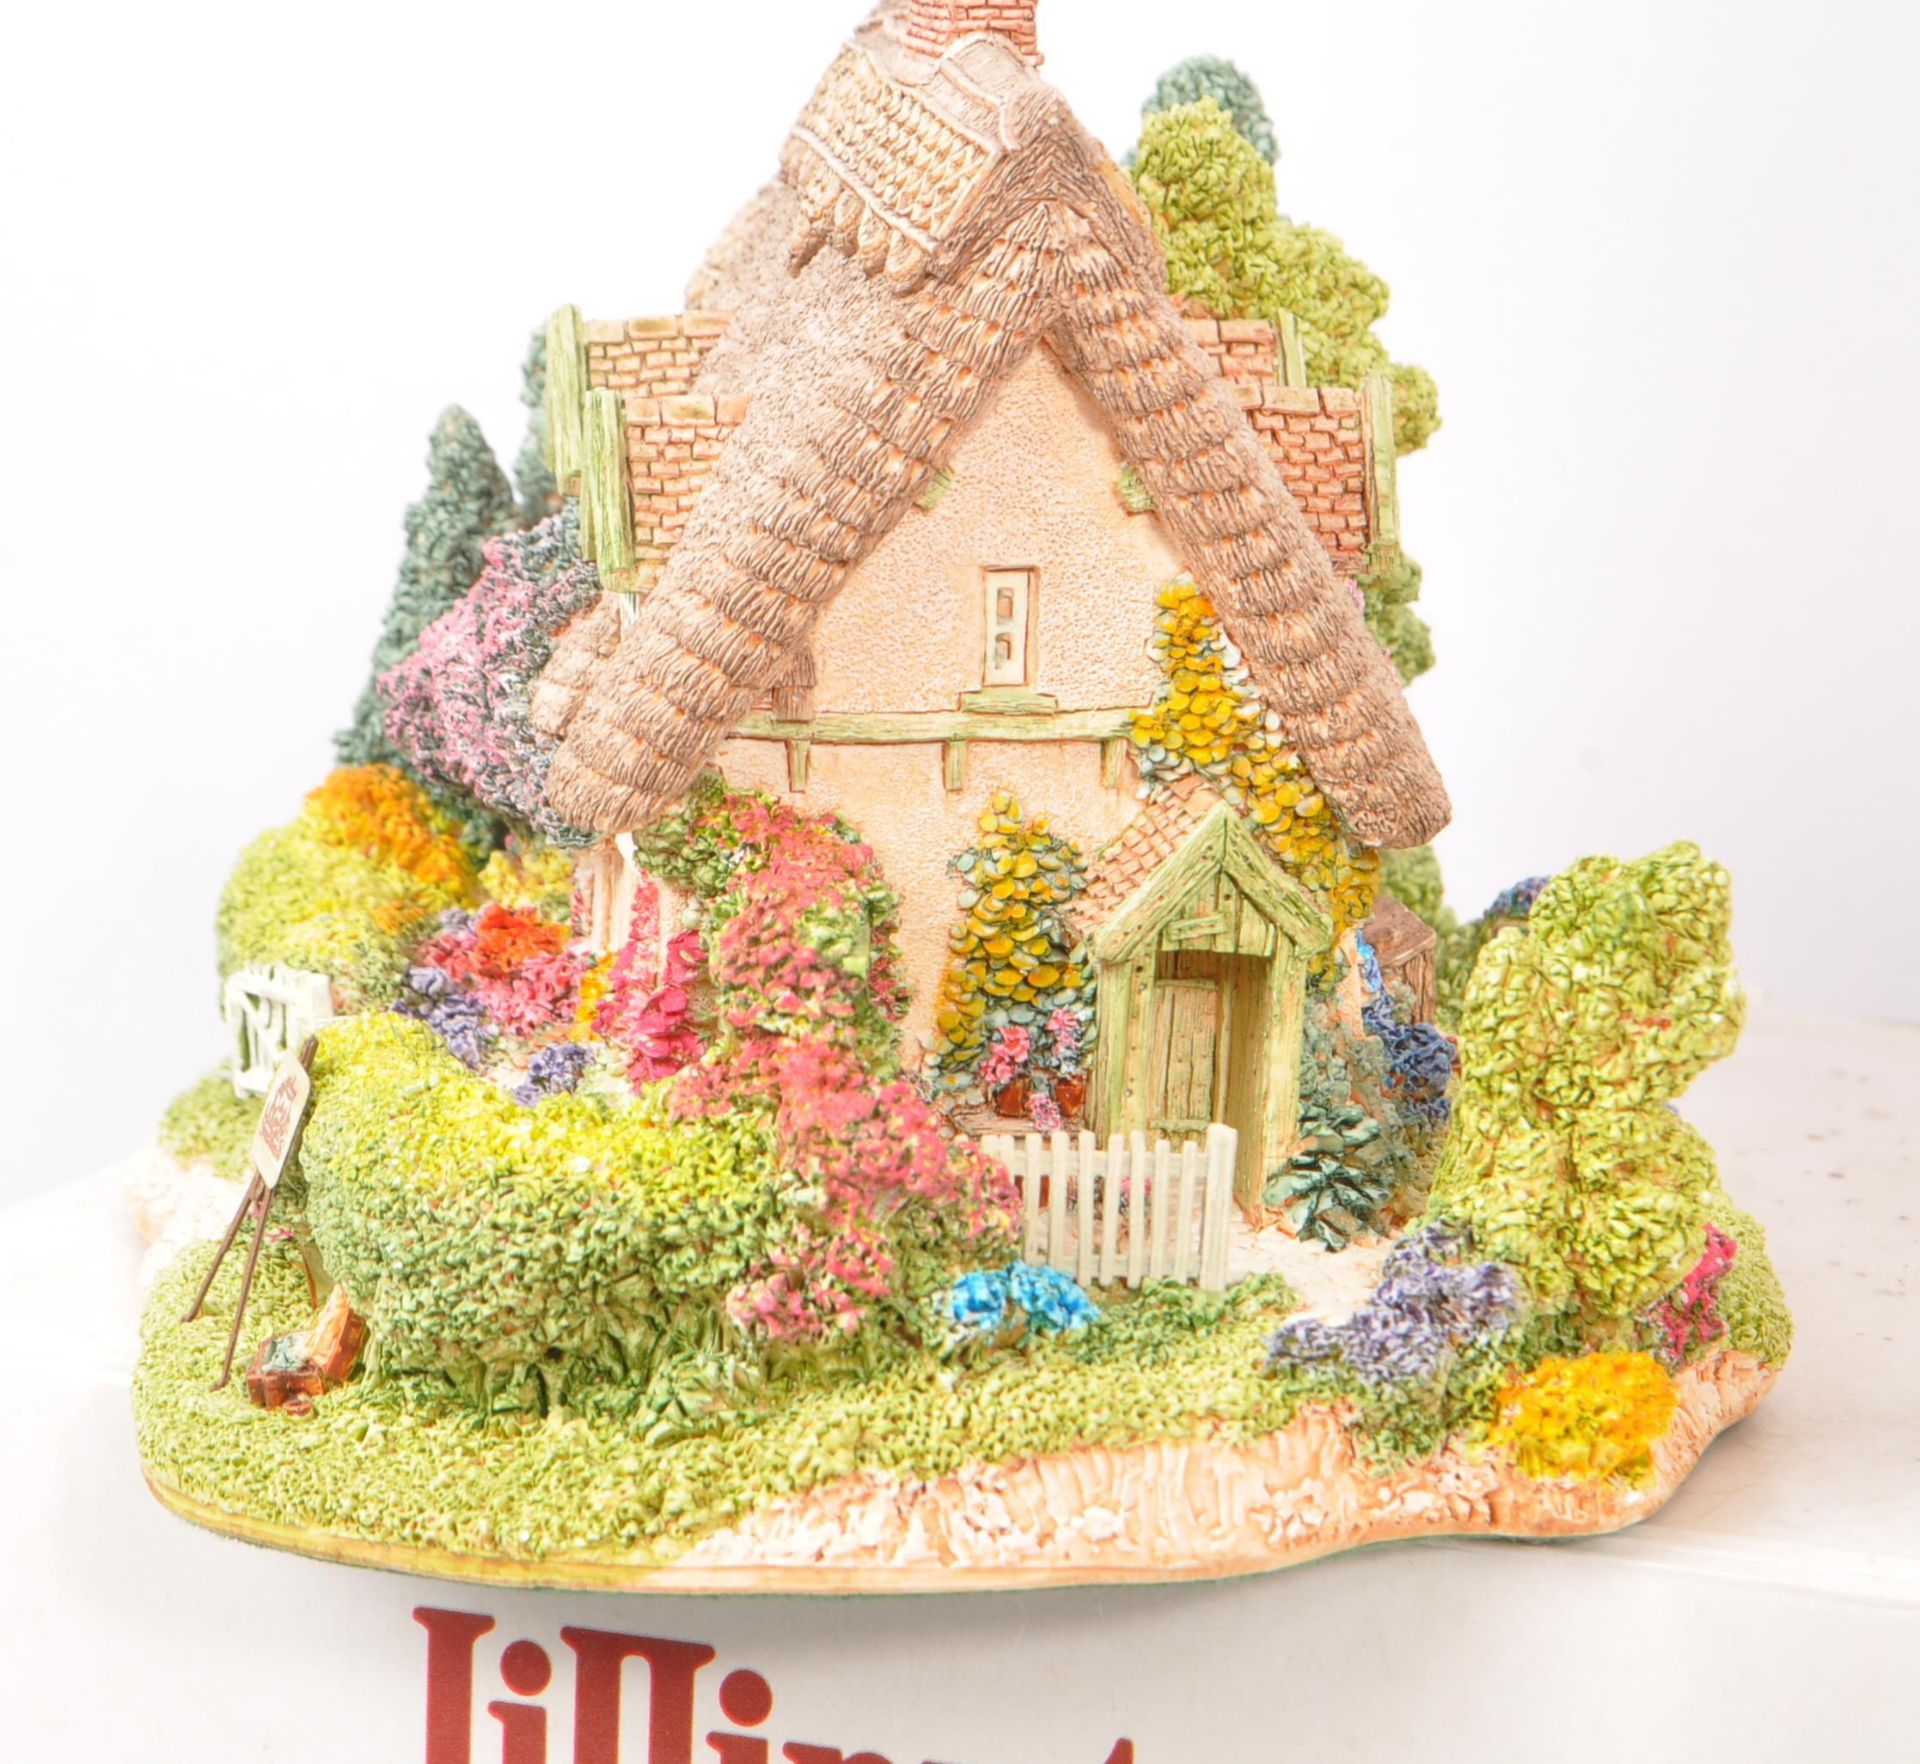 LILLIPUT LANE - COLLECTION OF HOUSE / COTTAGE FIGURINES - Image 12 of 15